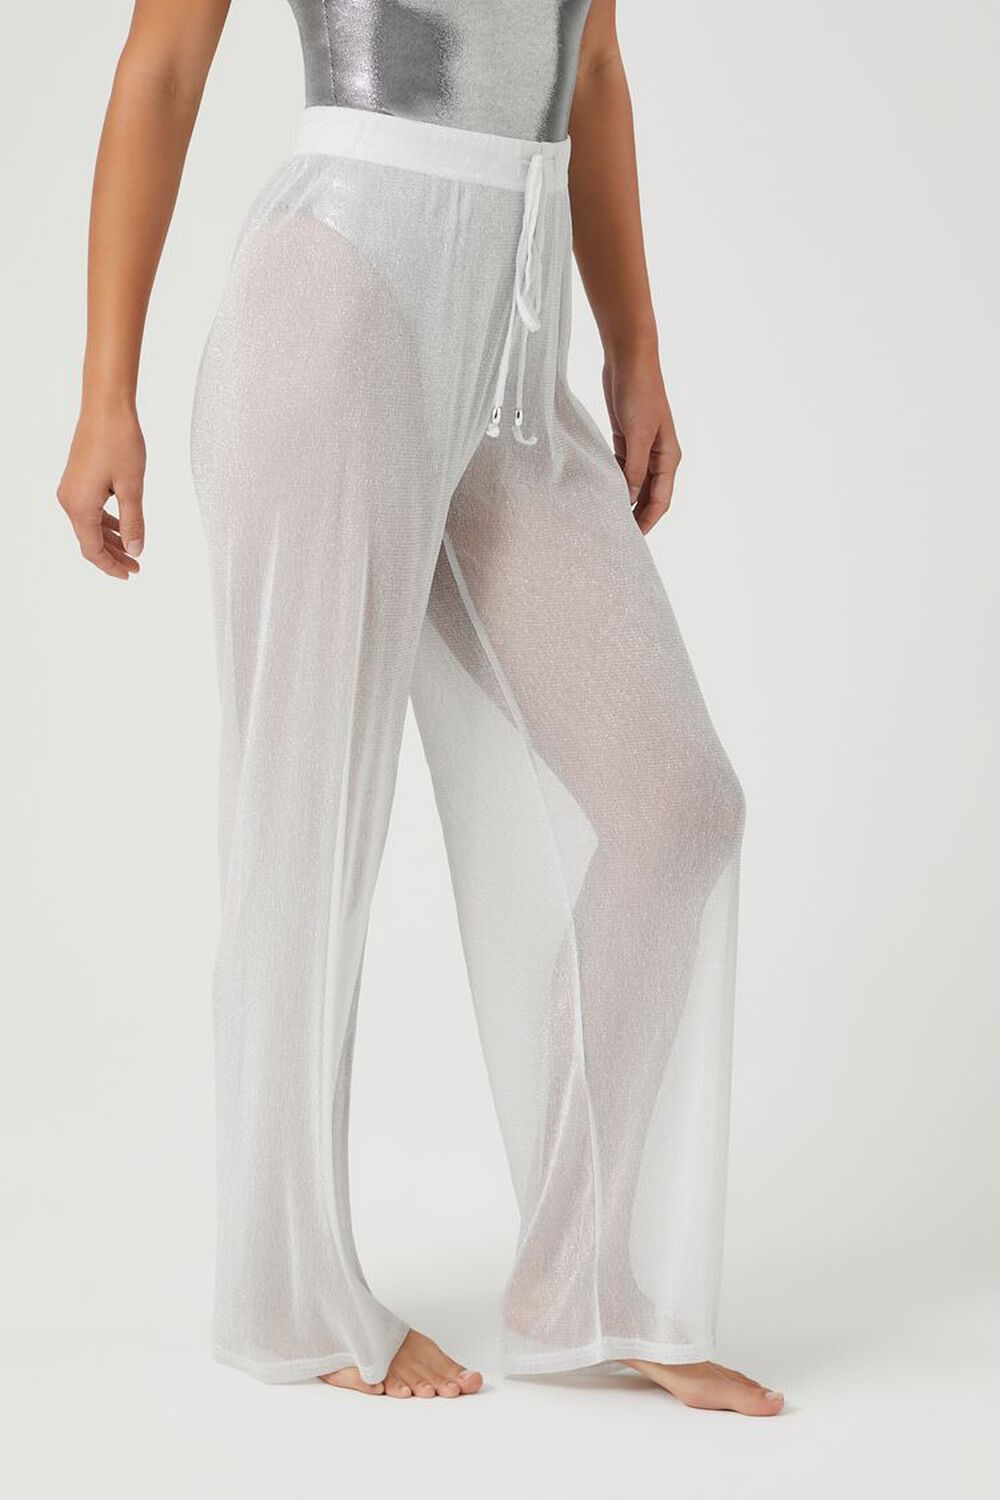 SILVER Sheer Glitter Swim Cover-Up Pants, image 3